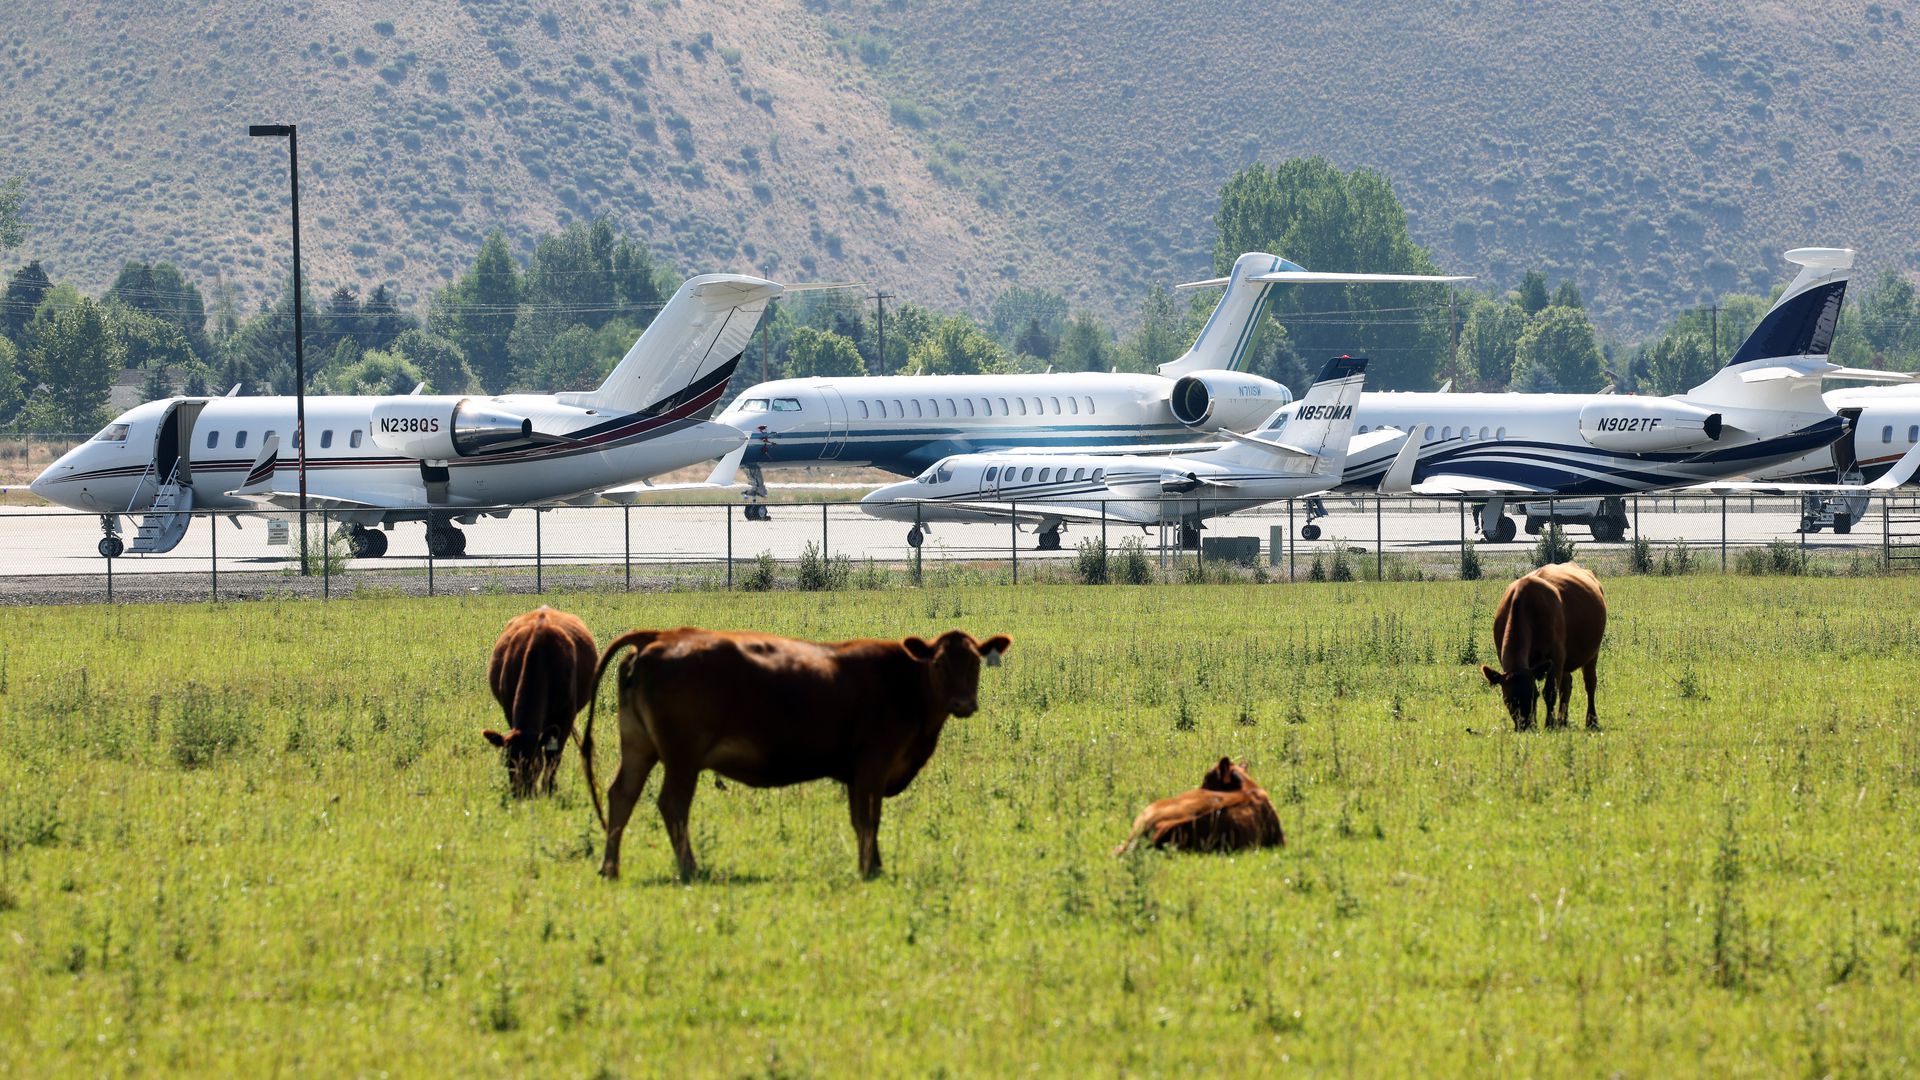 Jets arriving in Sun Valley